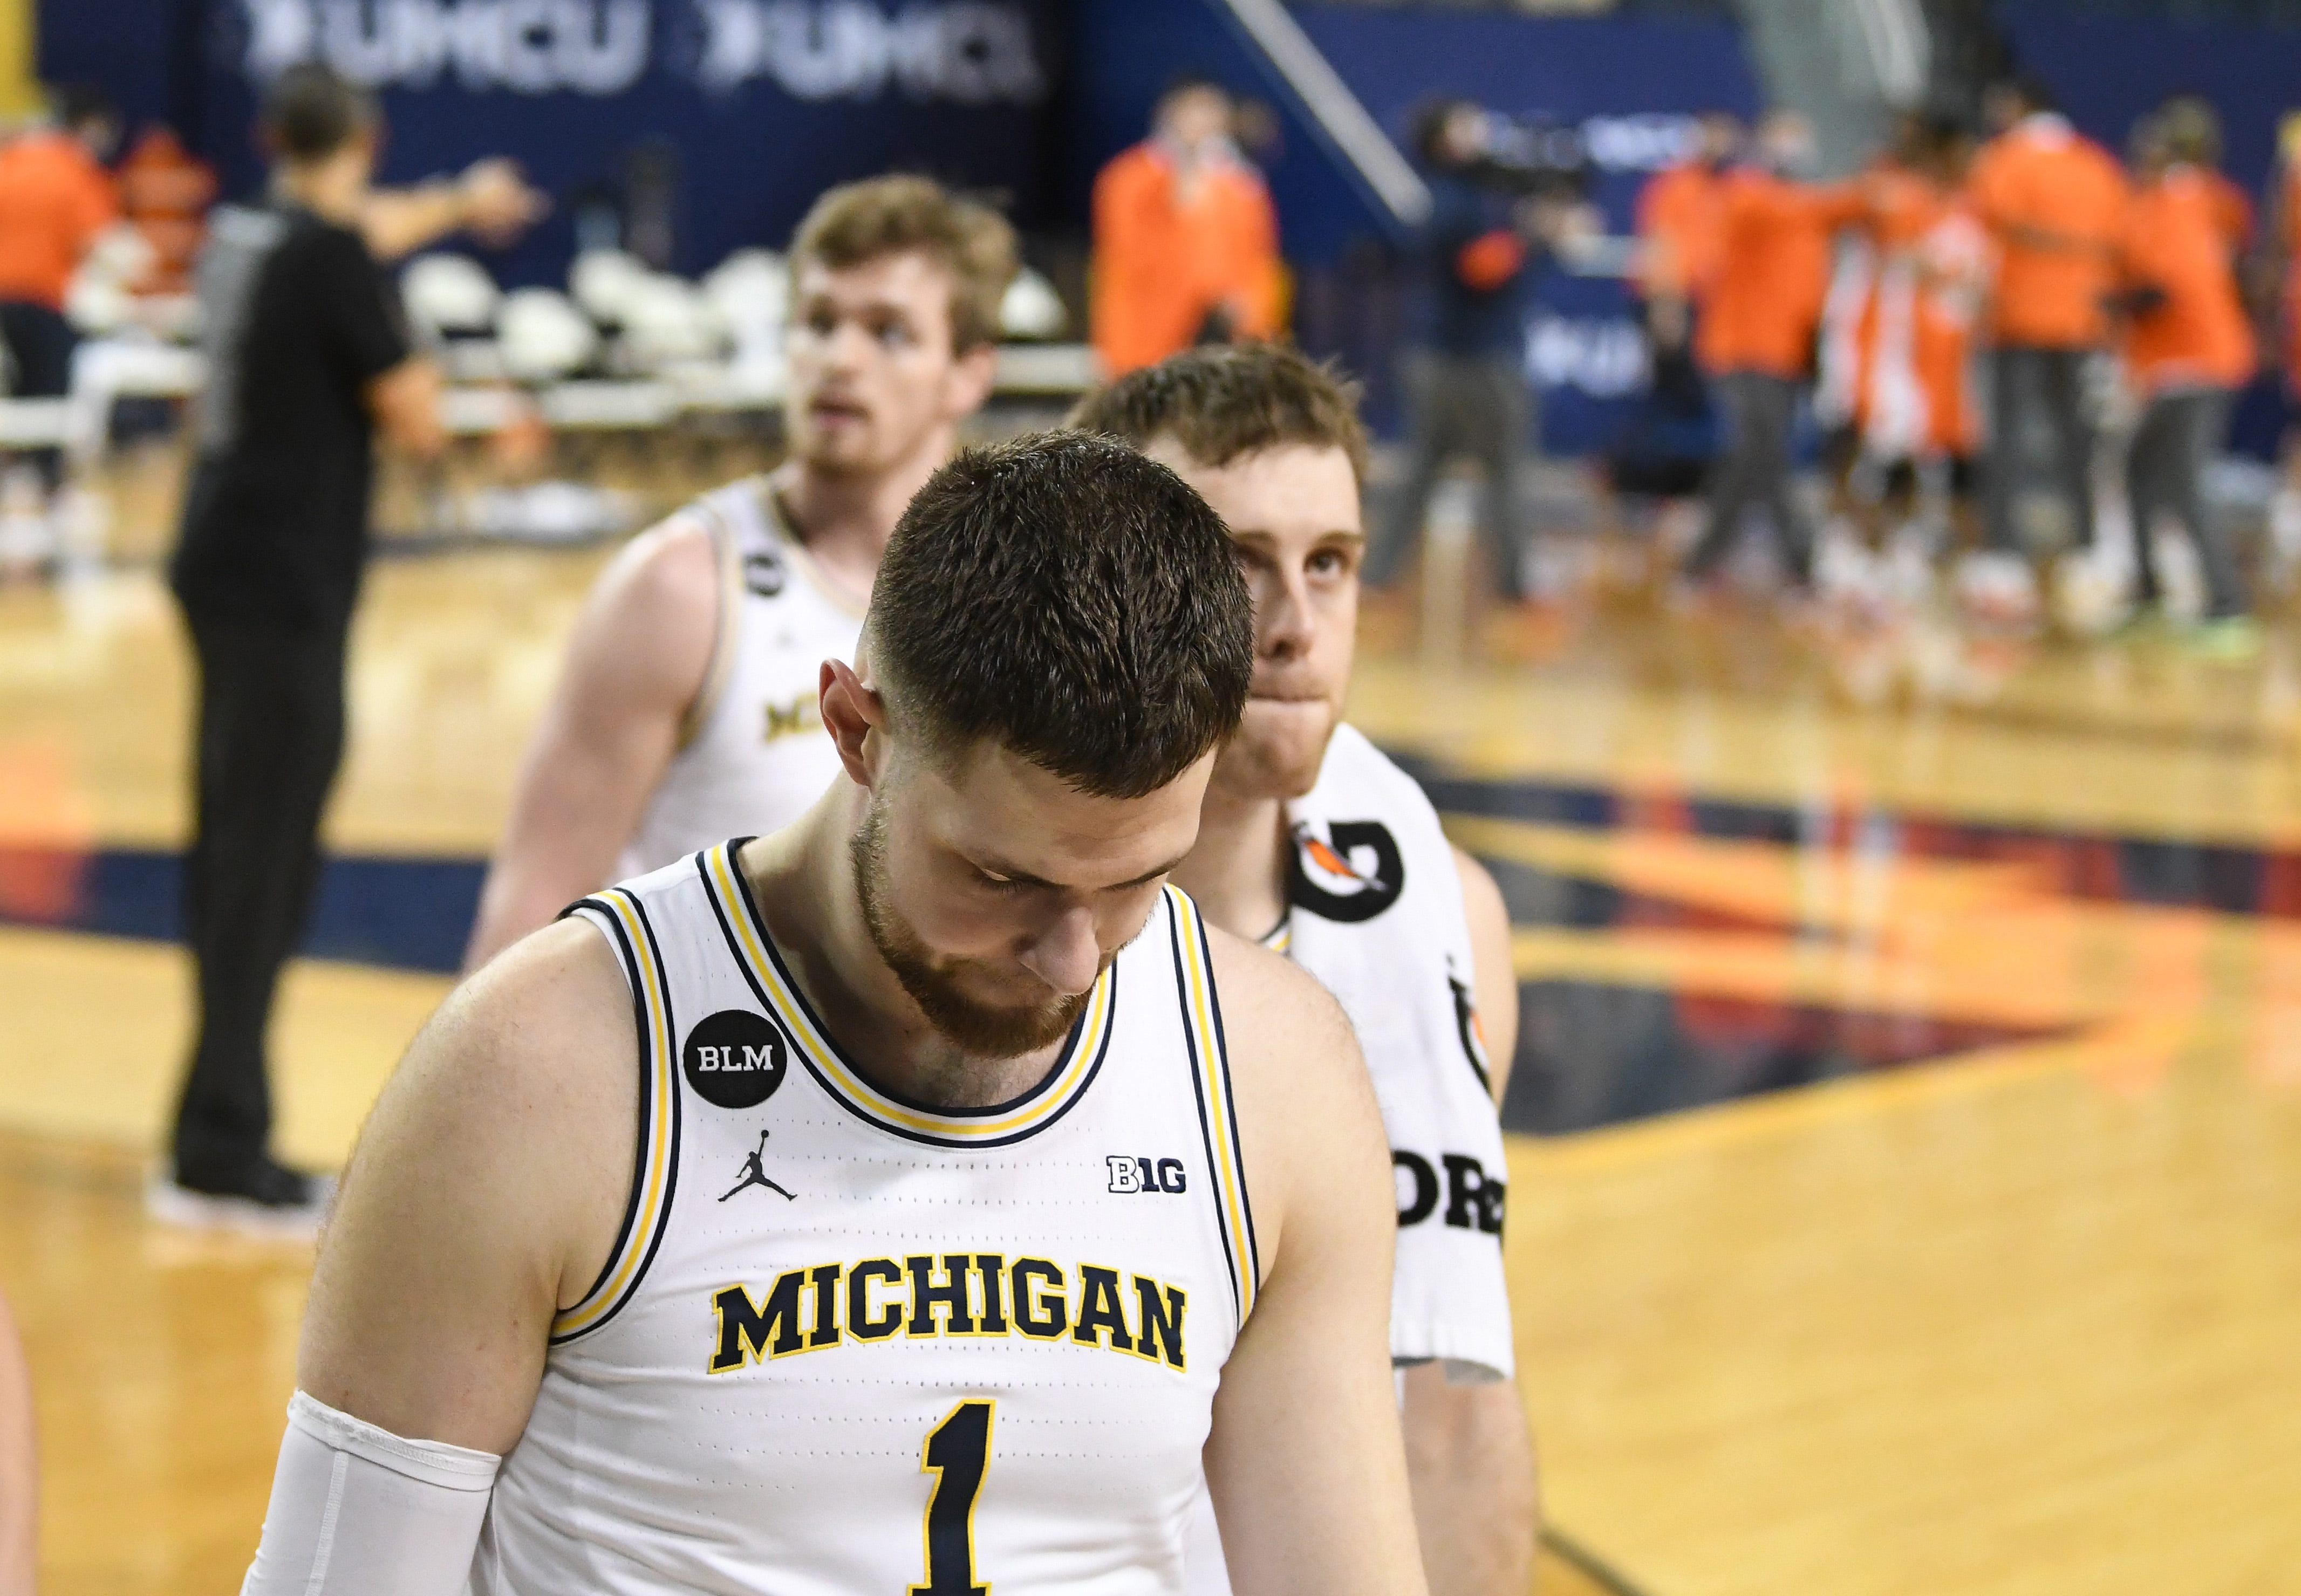 Michigan's Hunter Dickinson walks off the court after losing to Illinois 76-53.